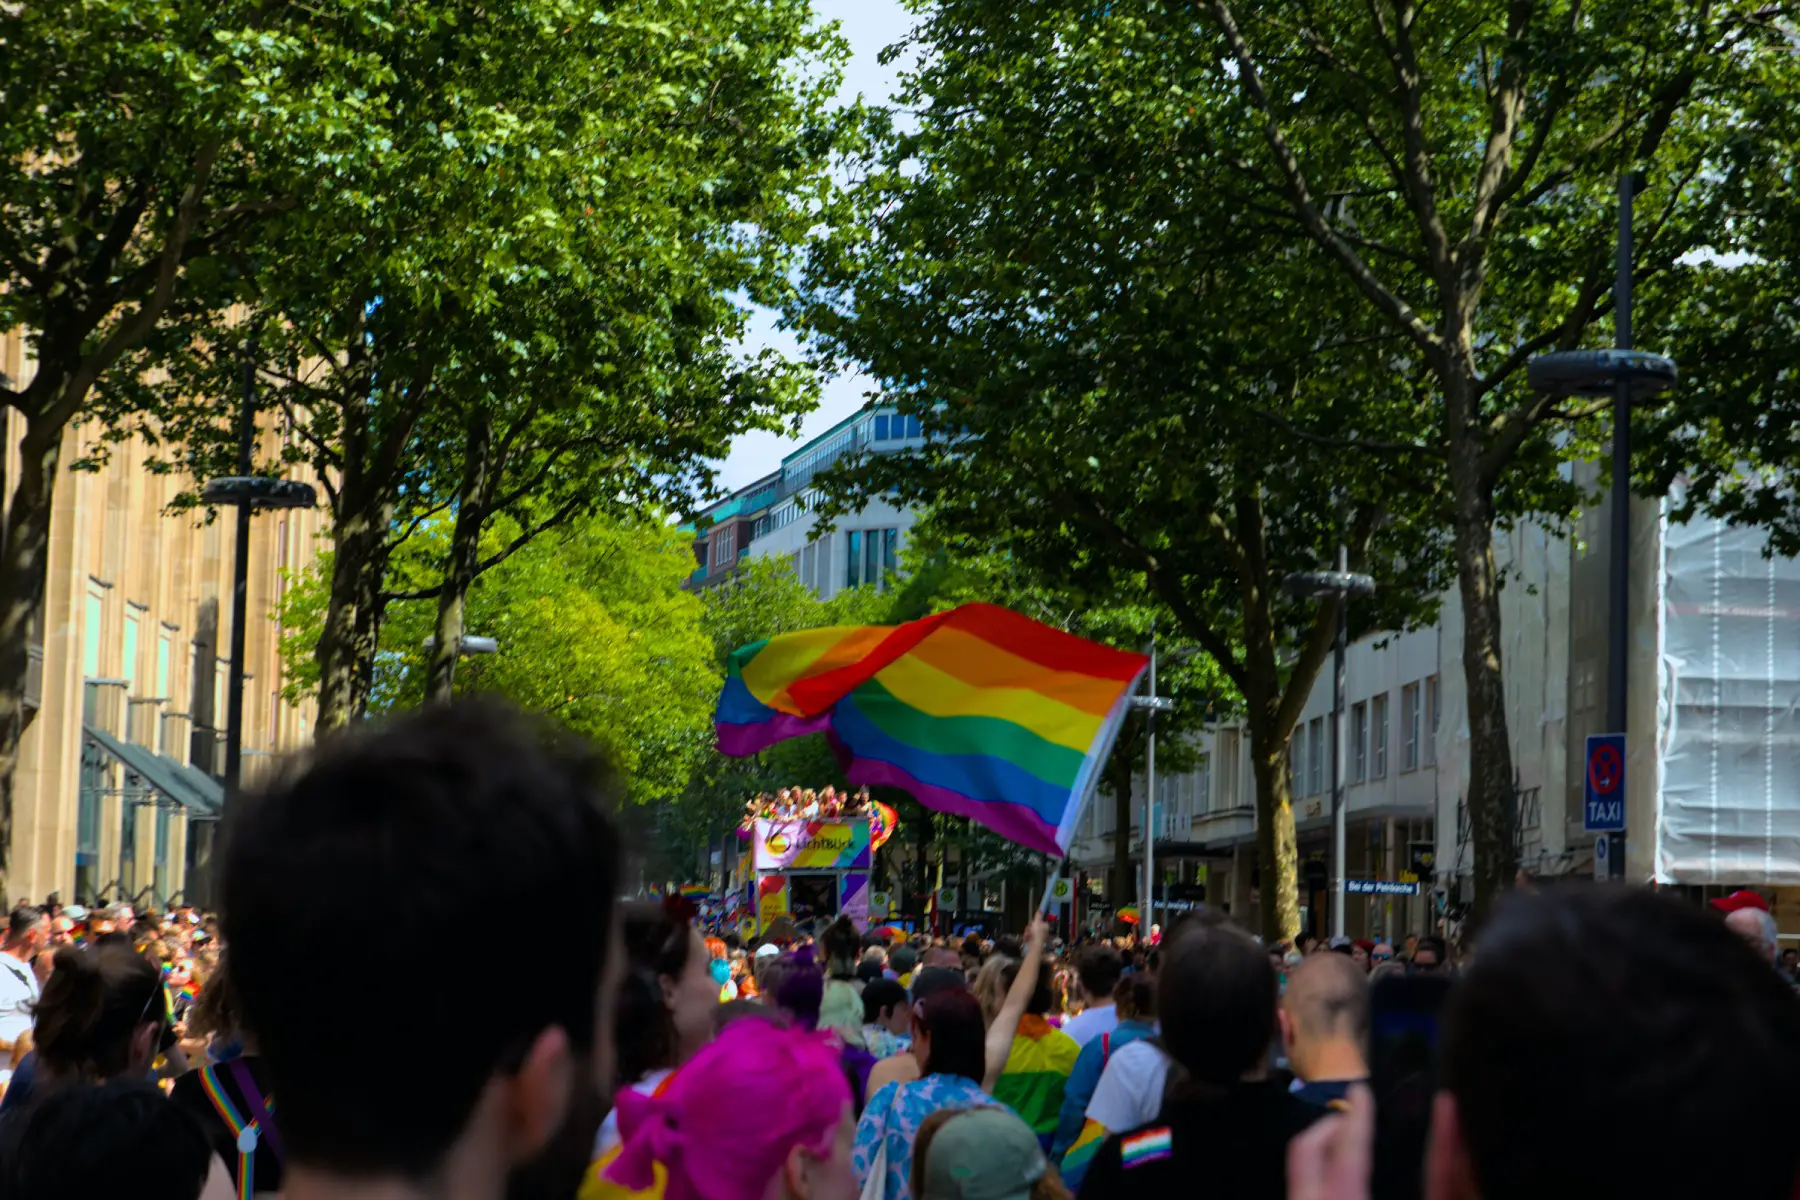 Crowds of people marching along the streets on Hamburg waving an LGBT flag in celebration of Hamburg Pride